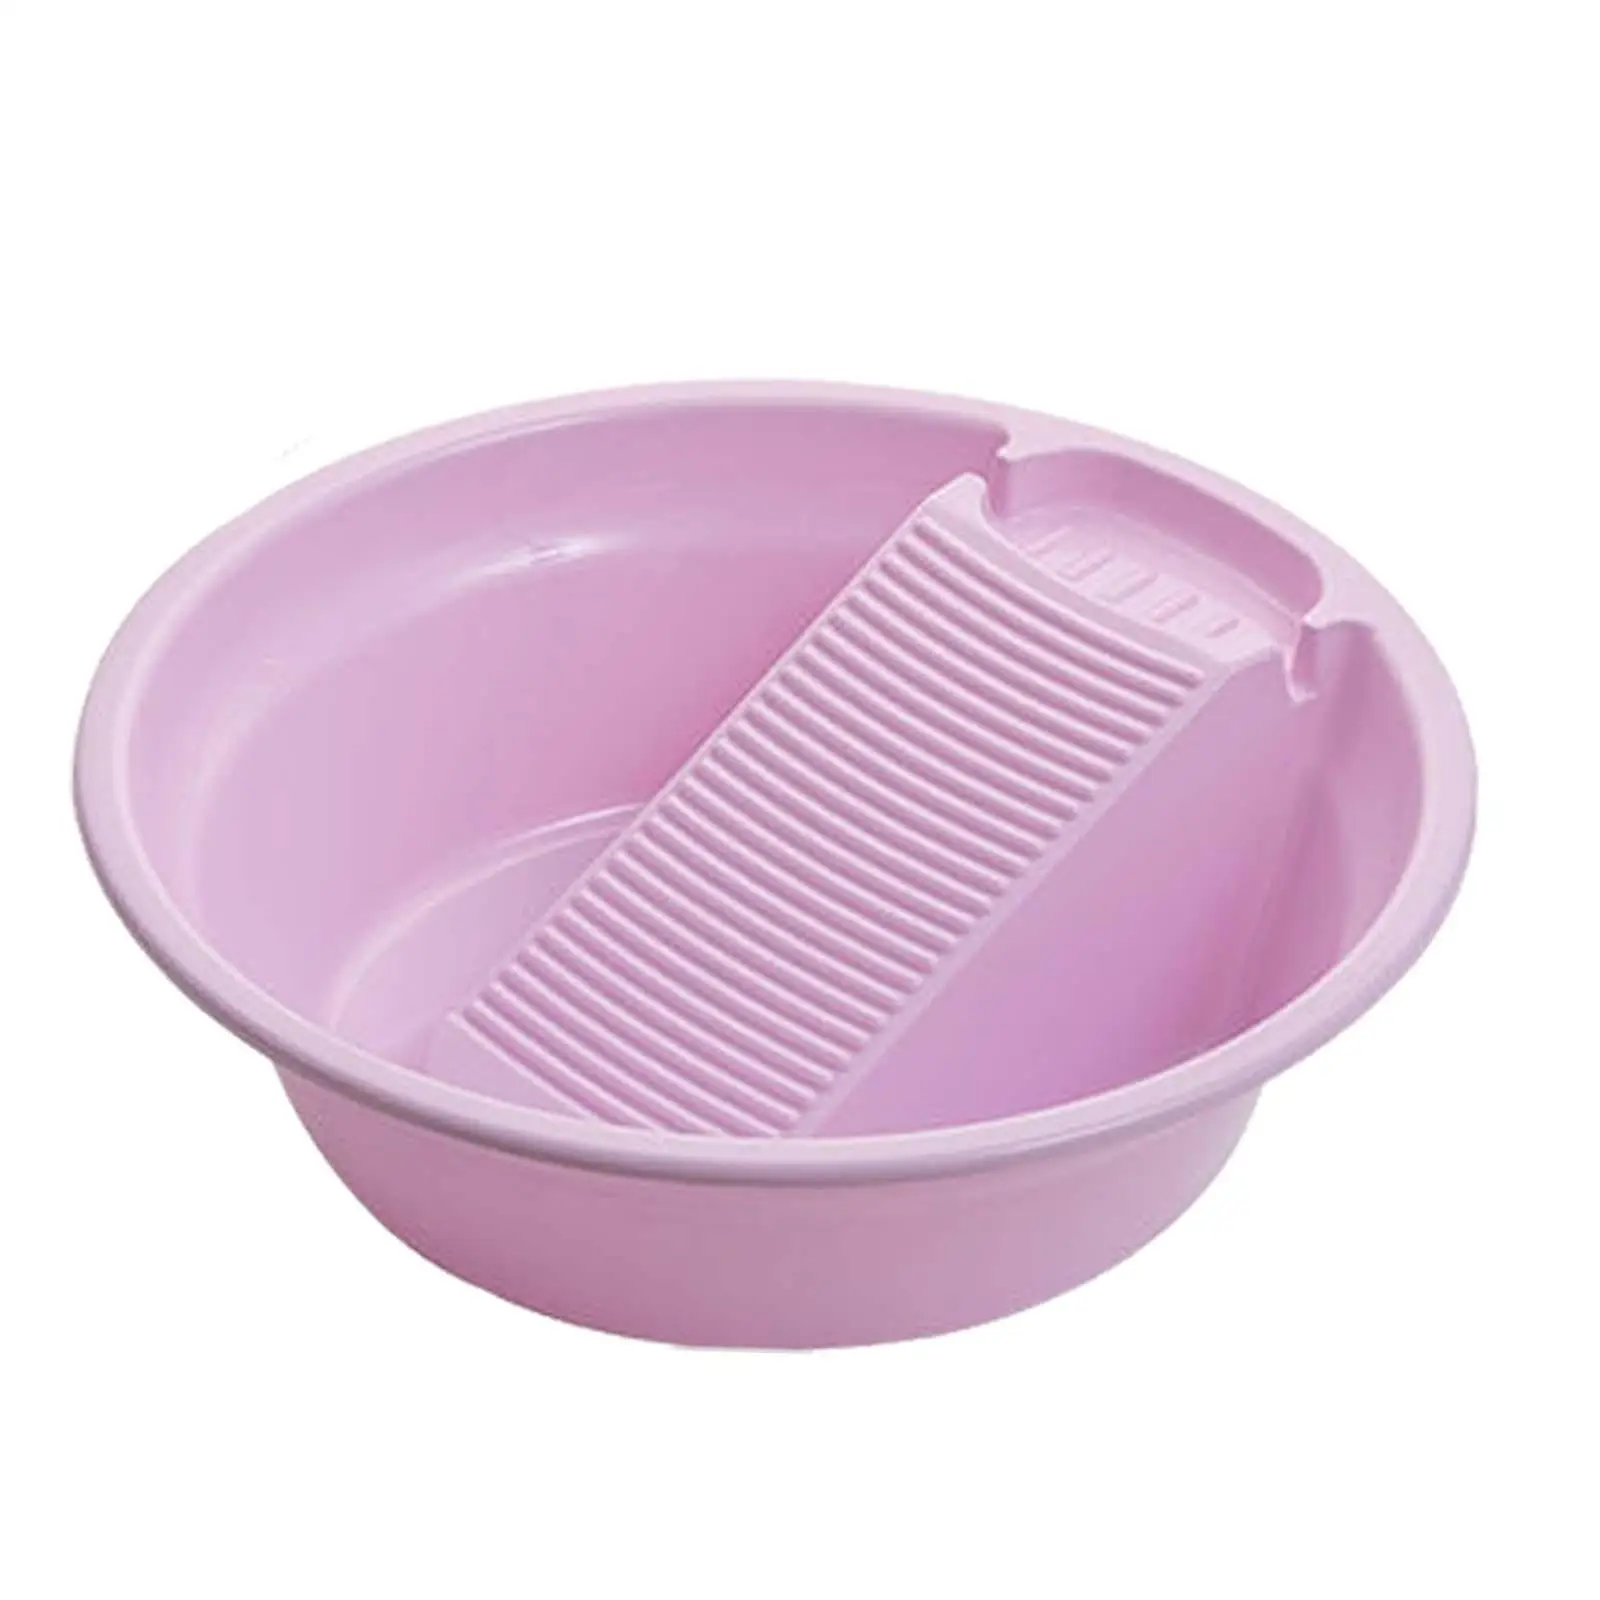 Washboard Basin Thickened Non Slip Basin for Laundry Washtub with Washboard Integrated for T Shirts Clothes Travel Pants Blouses